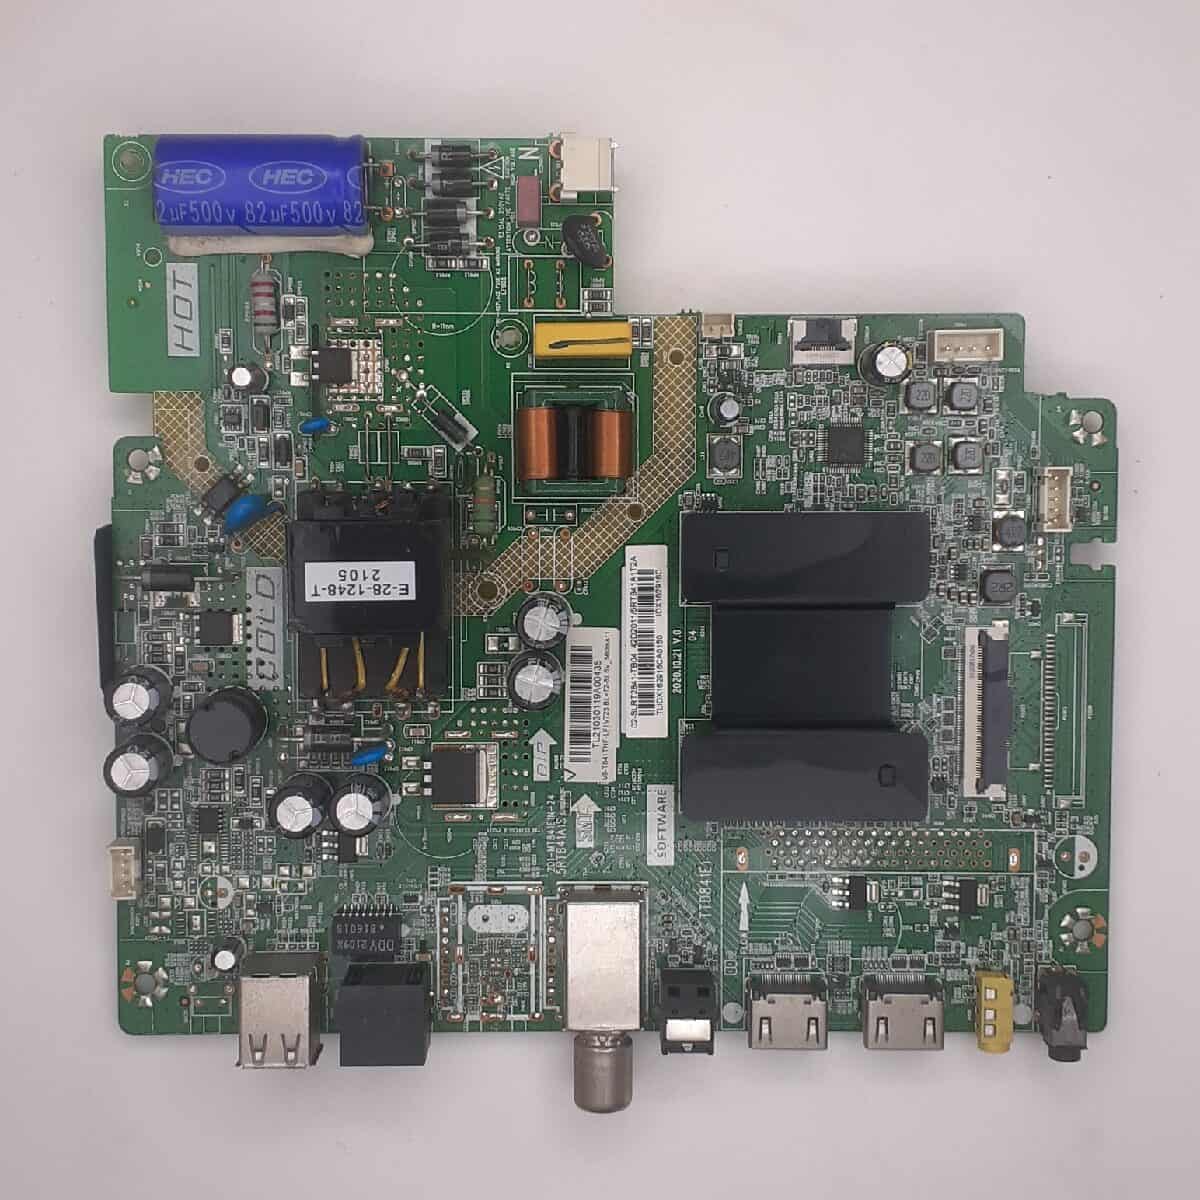 TH-42J660DX PANASONIC MOTHERBOARD FOR LED TV